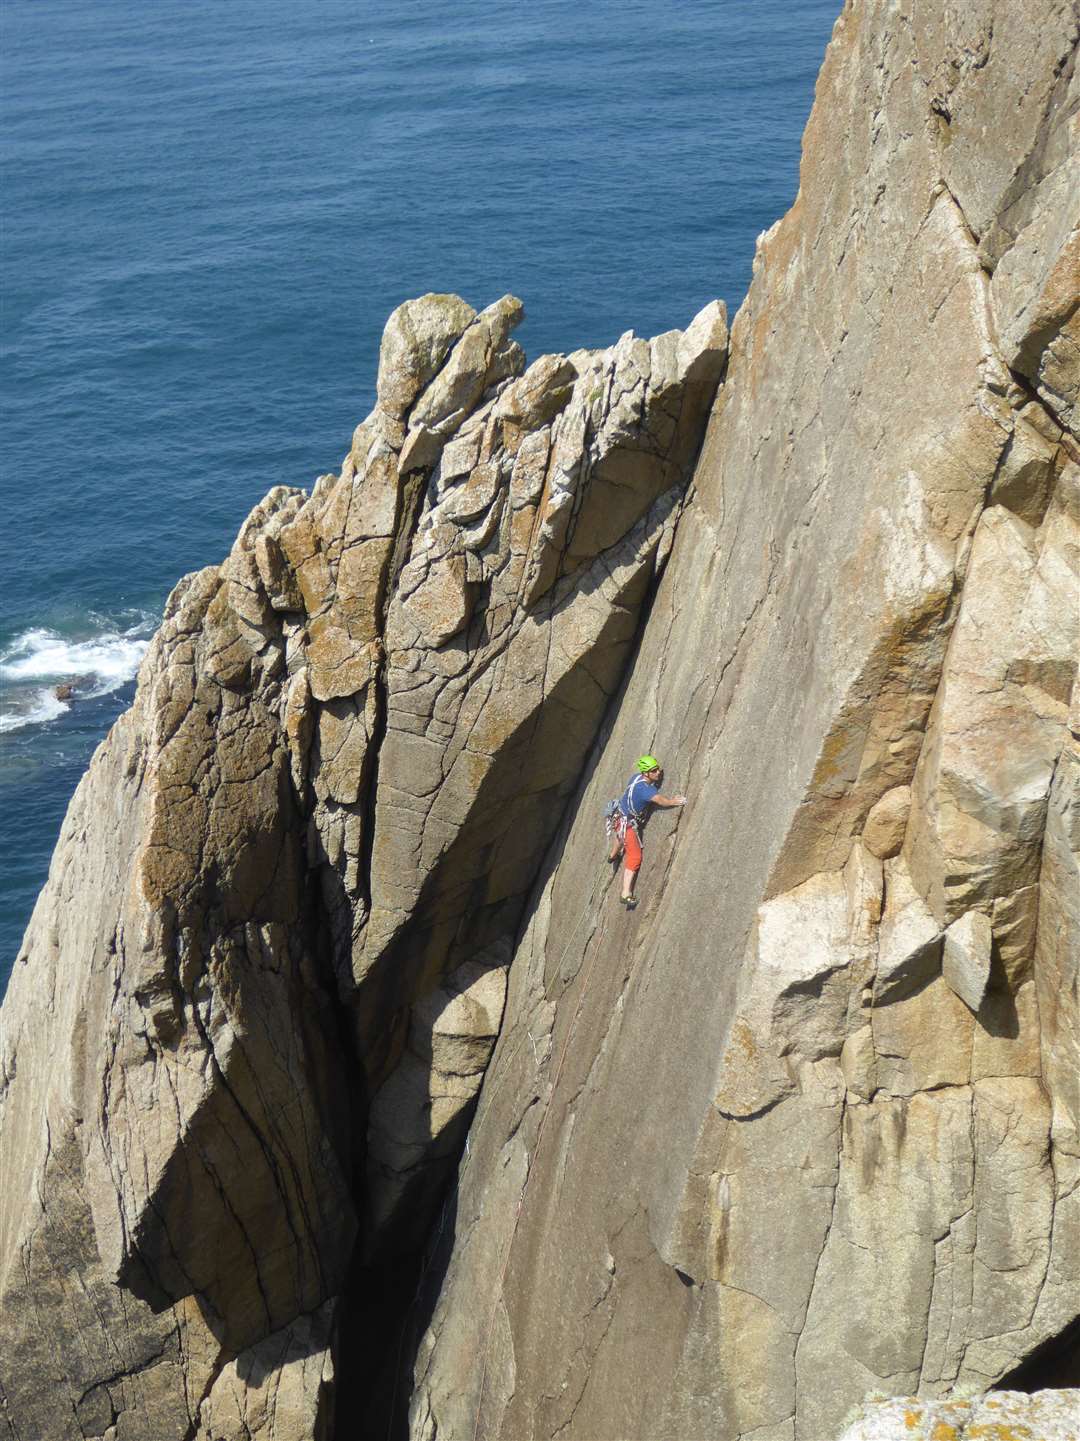 Toby Ernster on Double Diamond on Lundy Island in the Bristol Channel